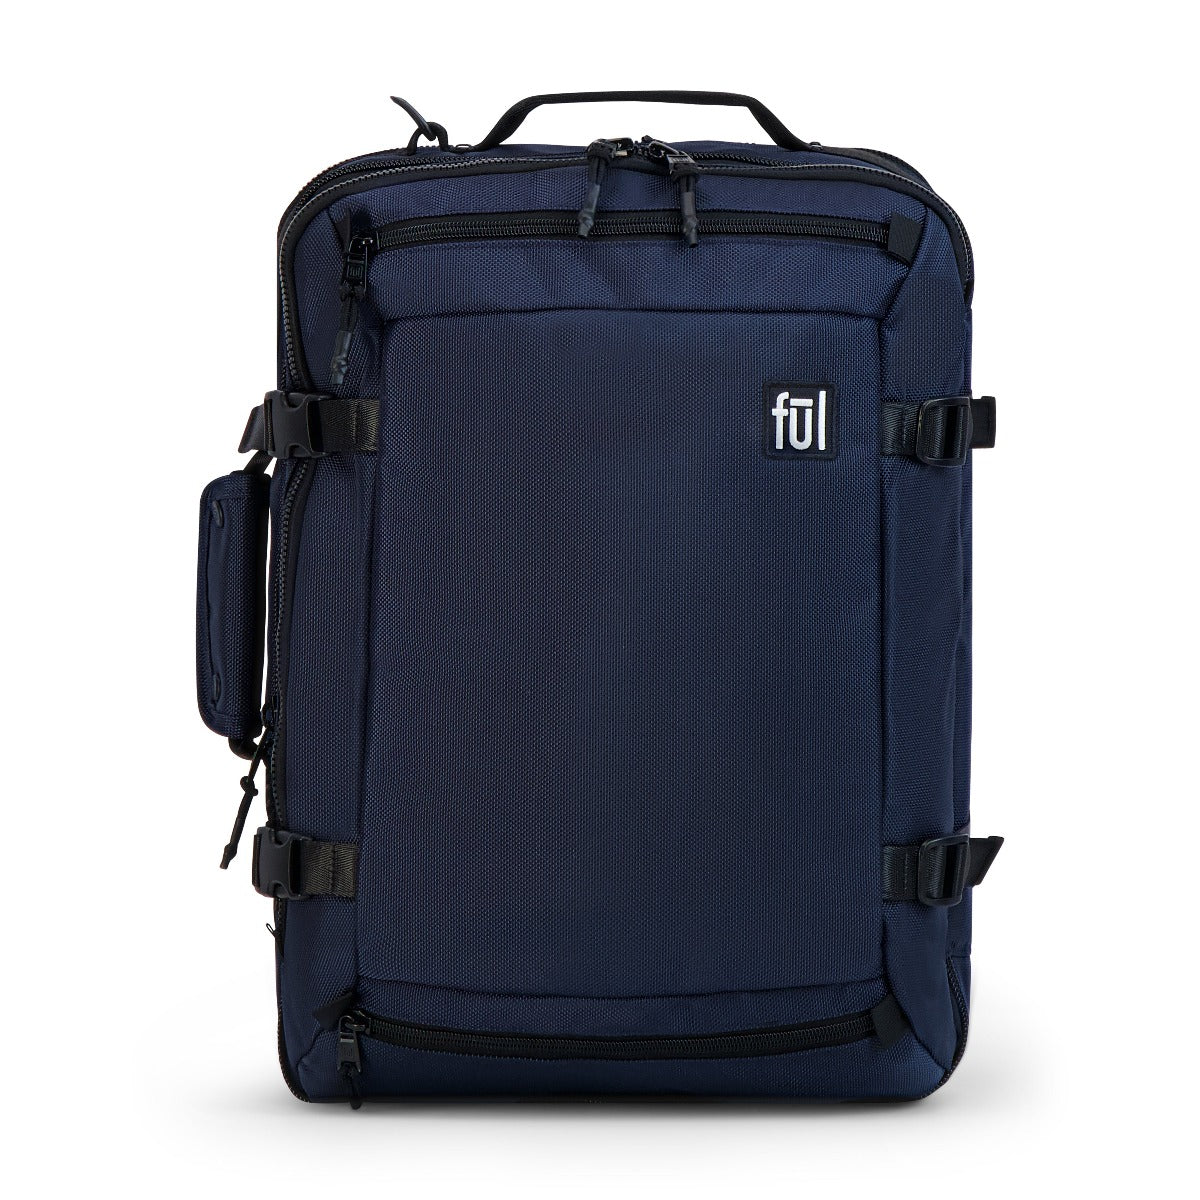 ful ridge collection cruiser travel backpack navy blue - convertible backpacks